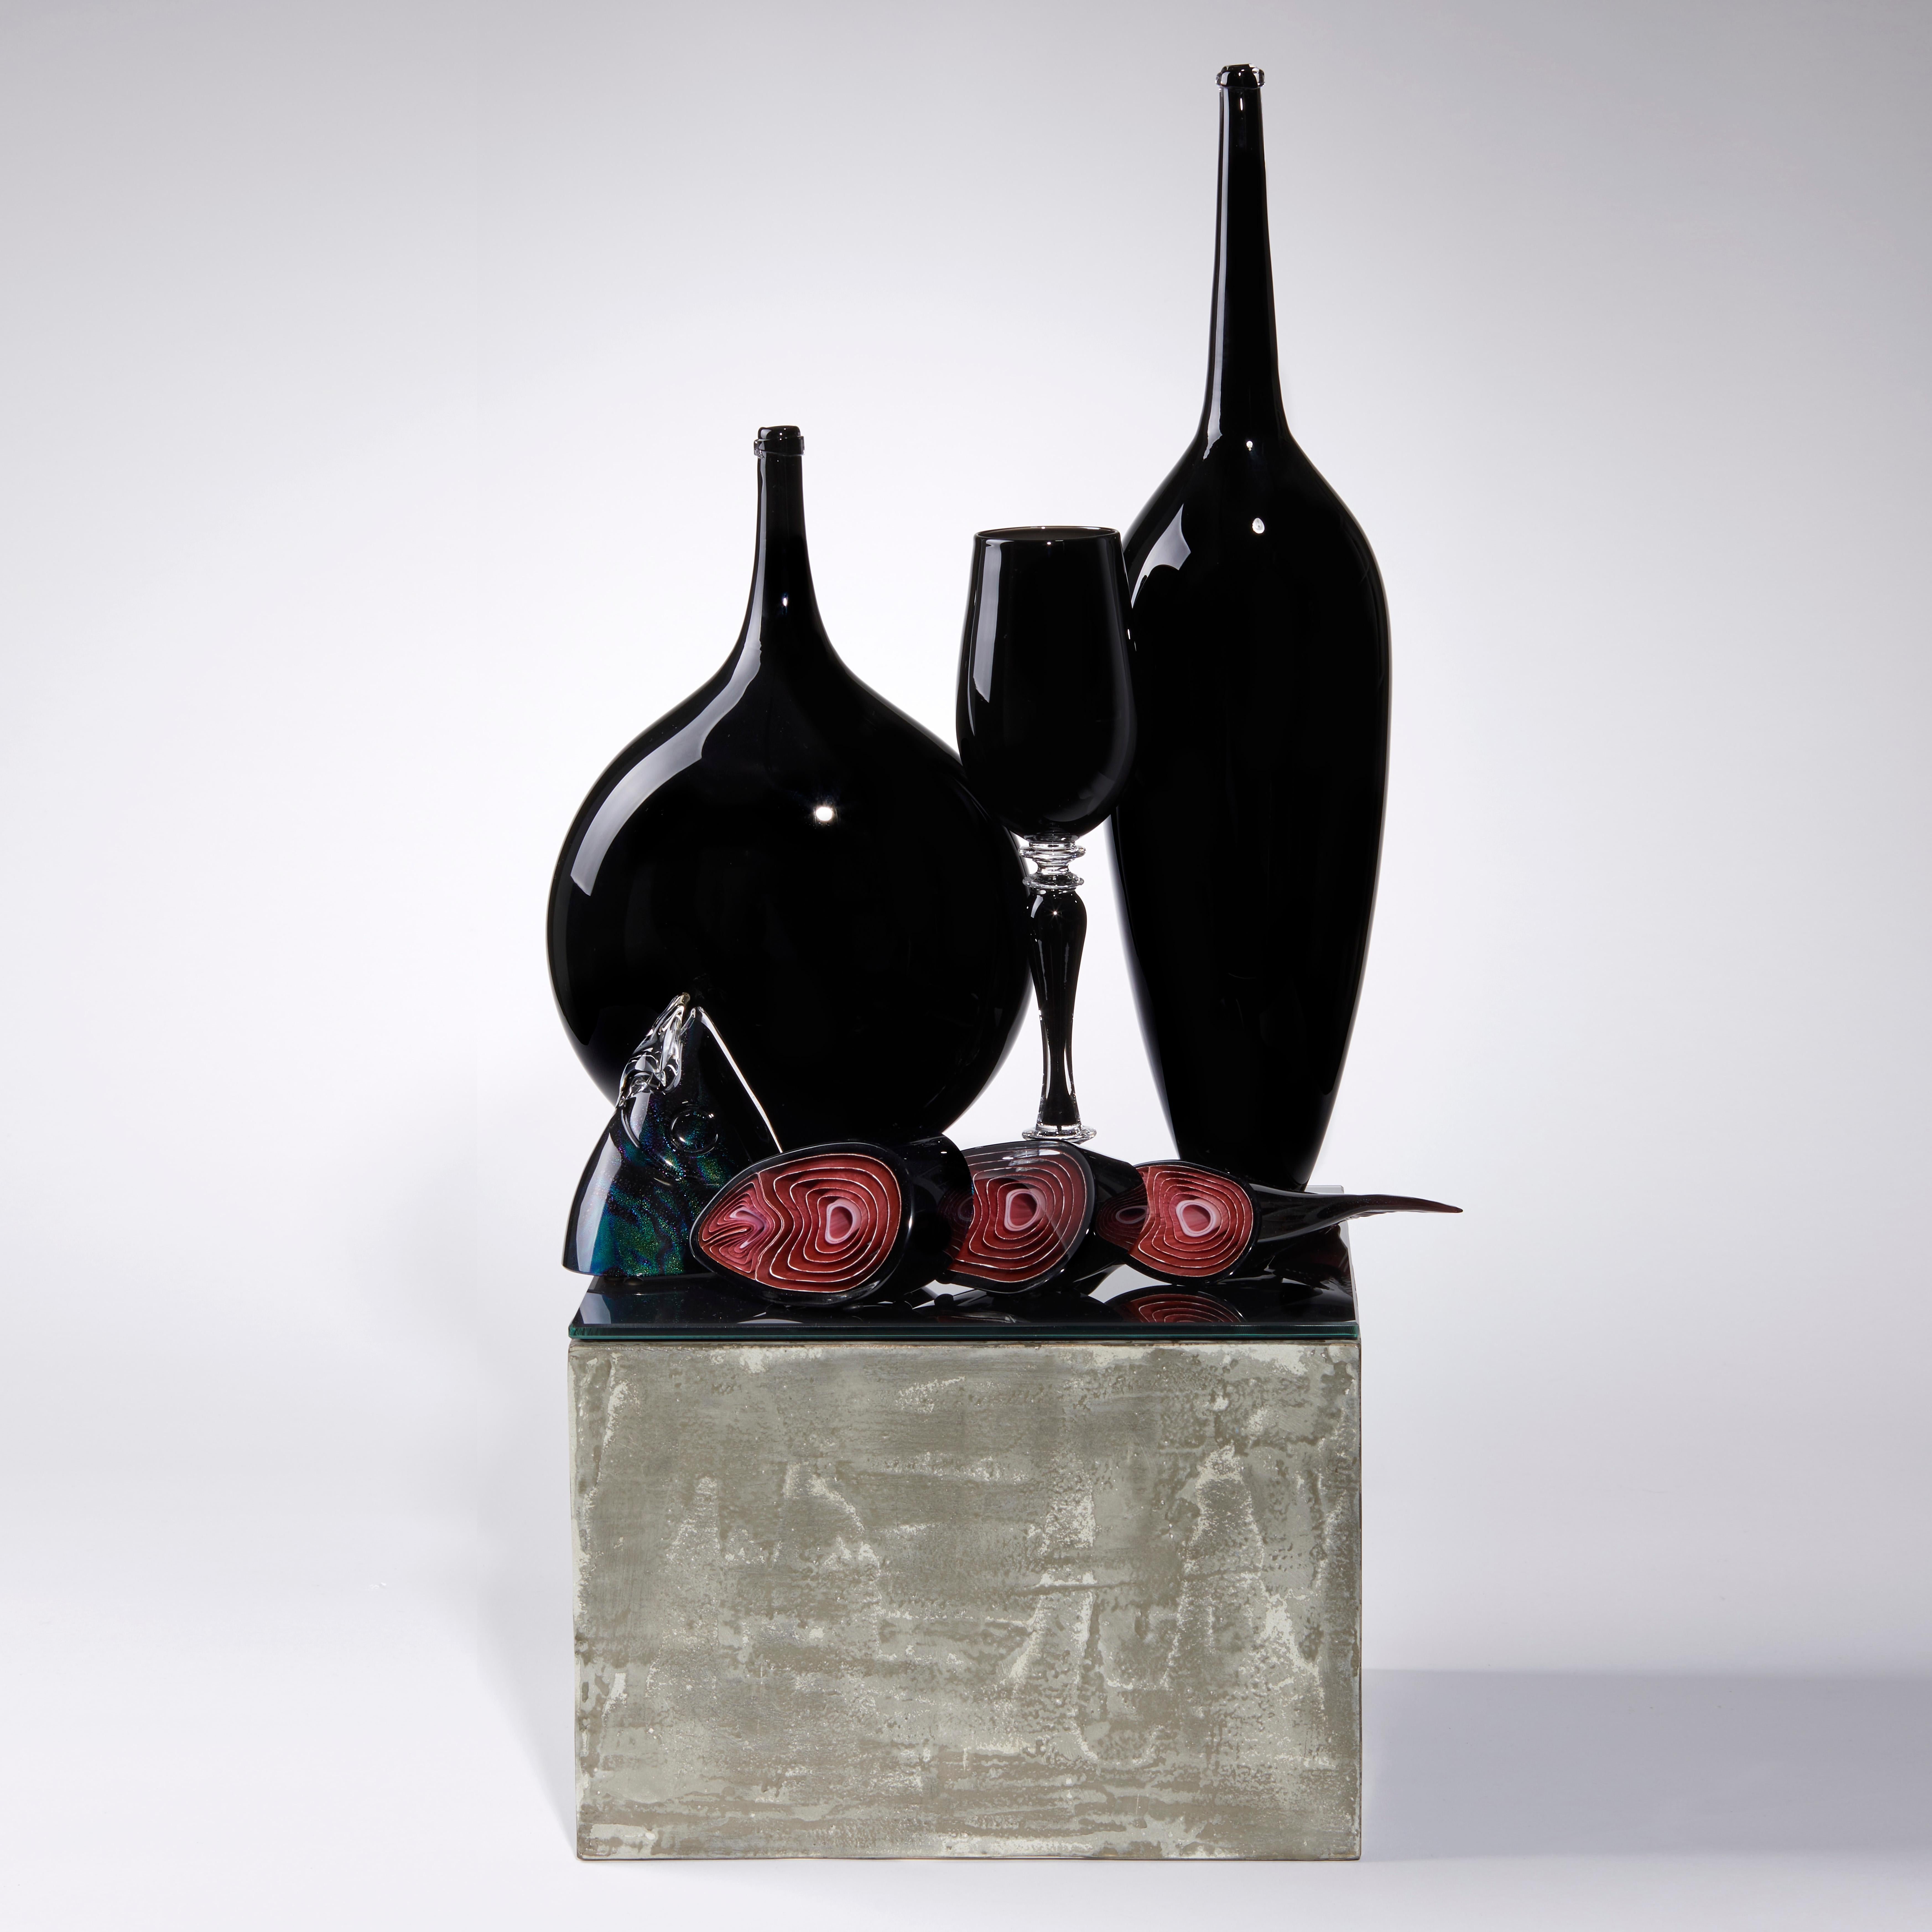 'Still life with fish' is a glass sculpture from the British artist and Blown Away II series winner, Elliot Walker's ongoing body of unique still life artworks. Freehand sculpted in black, red and clear glass with iridescent detail, the piece